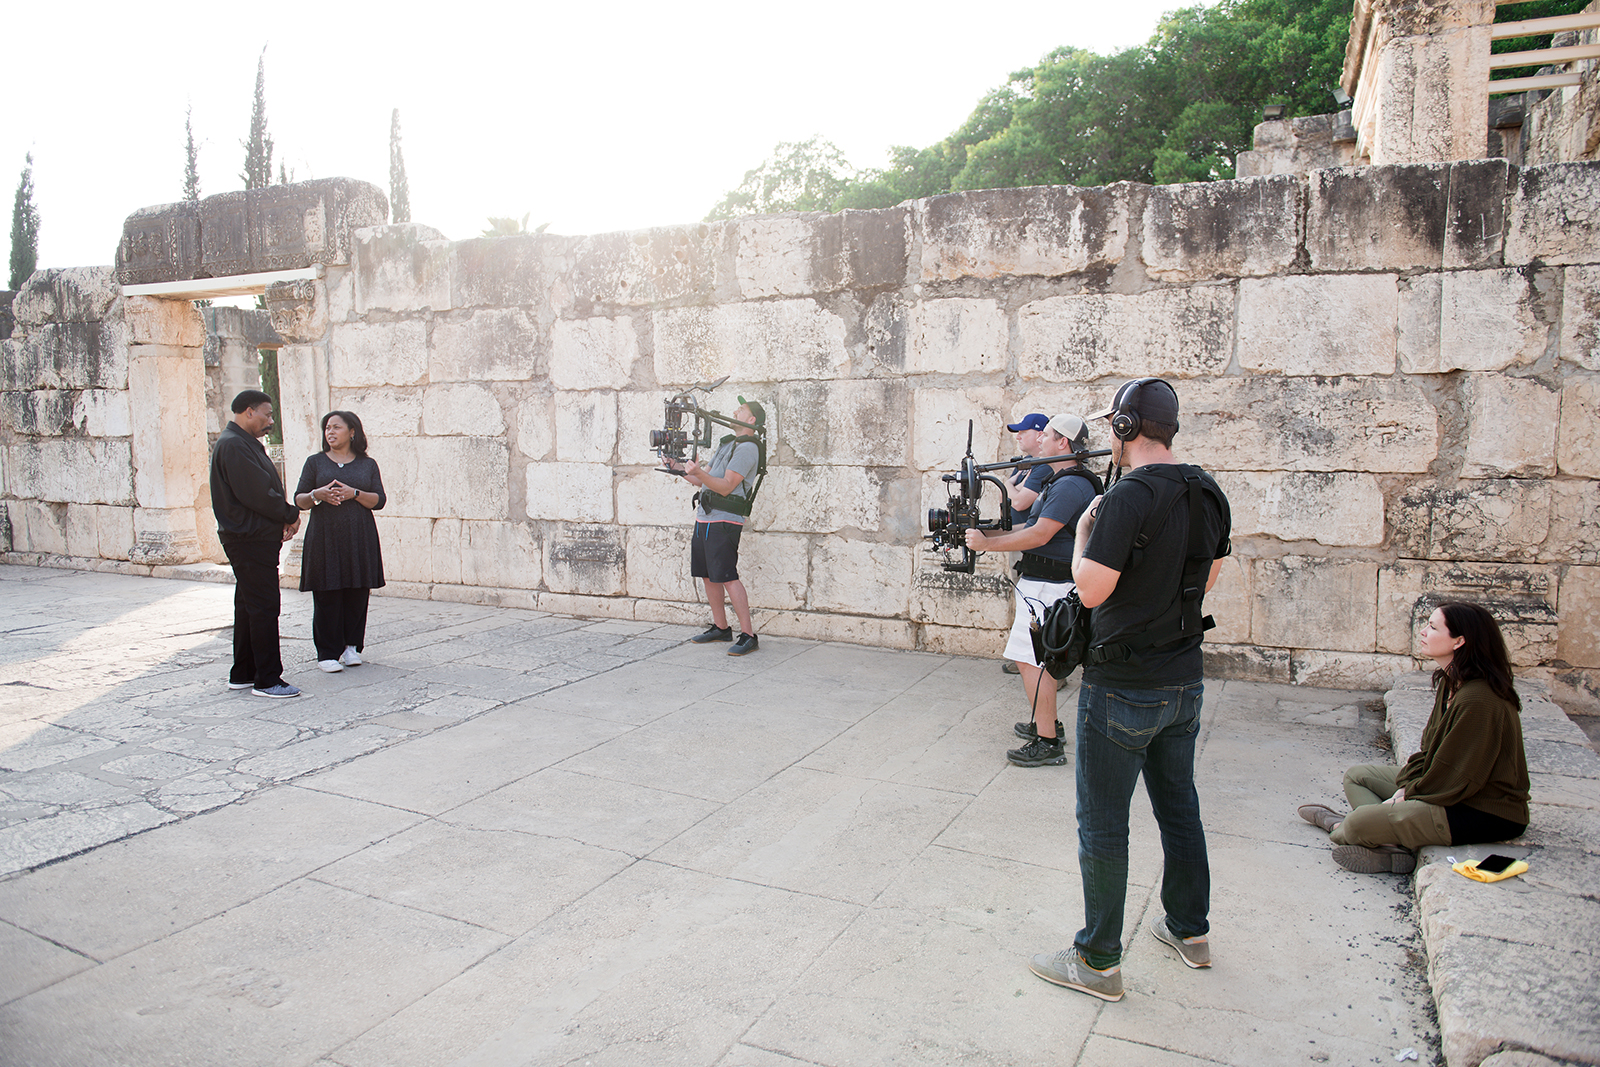 Pastor Tony Evans, left, and his daughter, Chrystal Evans Hurst, film a scene in "Journey with Jesus" during their 2018 trip to the Holy Land. Photo courtesy of Journey with Jesus